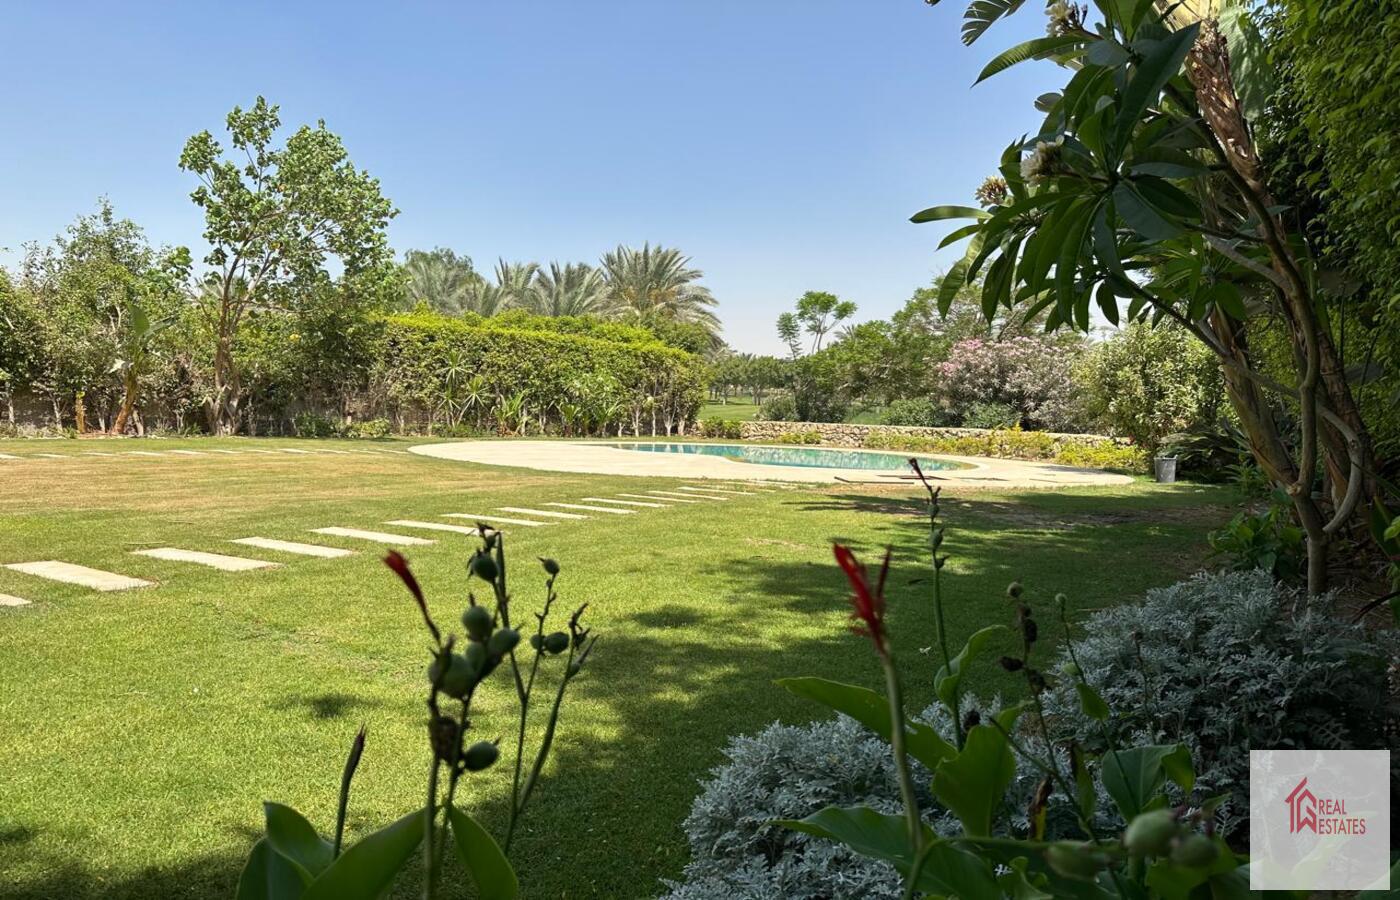 Excellence, beauty and elegance a unique villa for rent, fully furnished, in katameya Dunes Golf View Cairo egypt